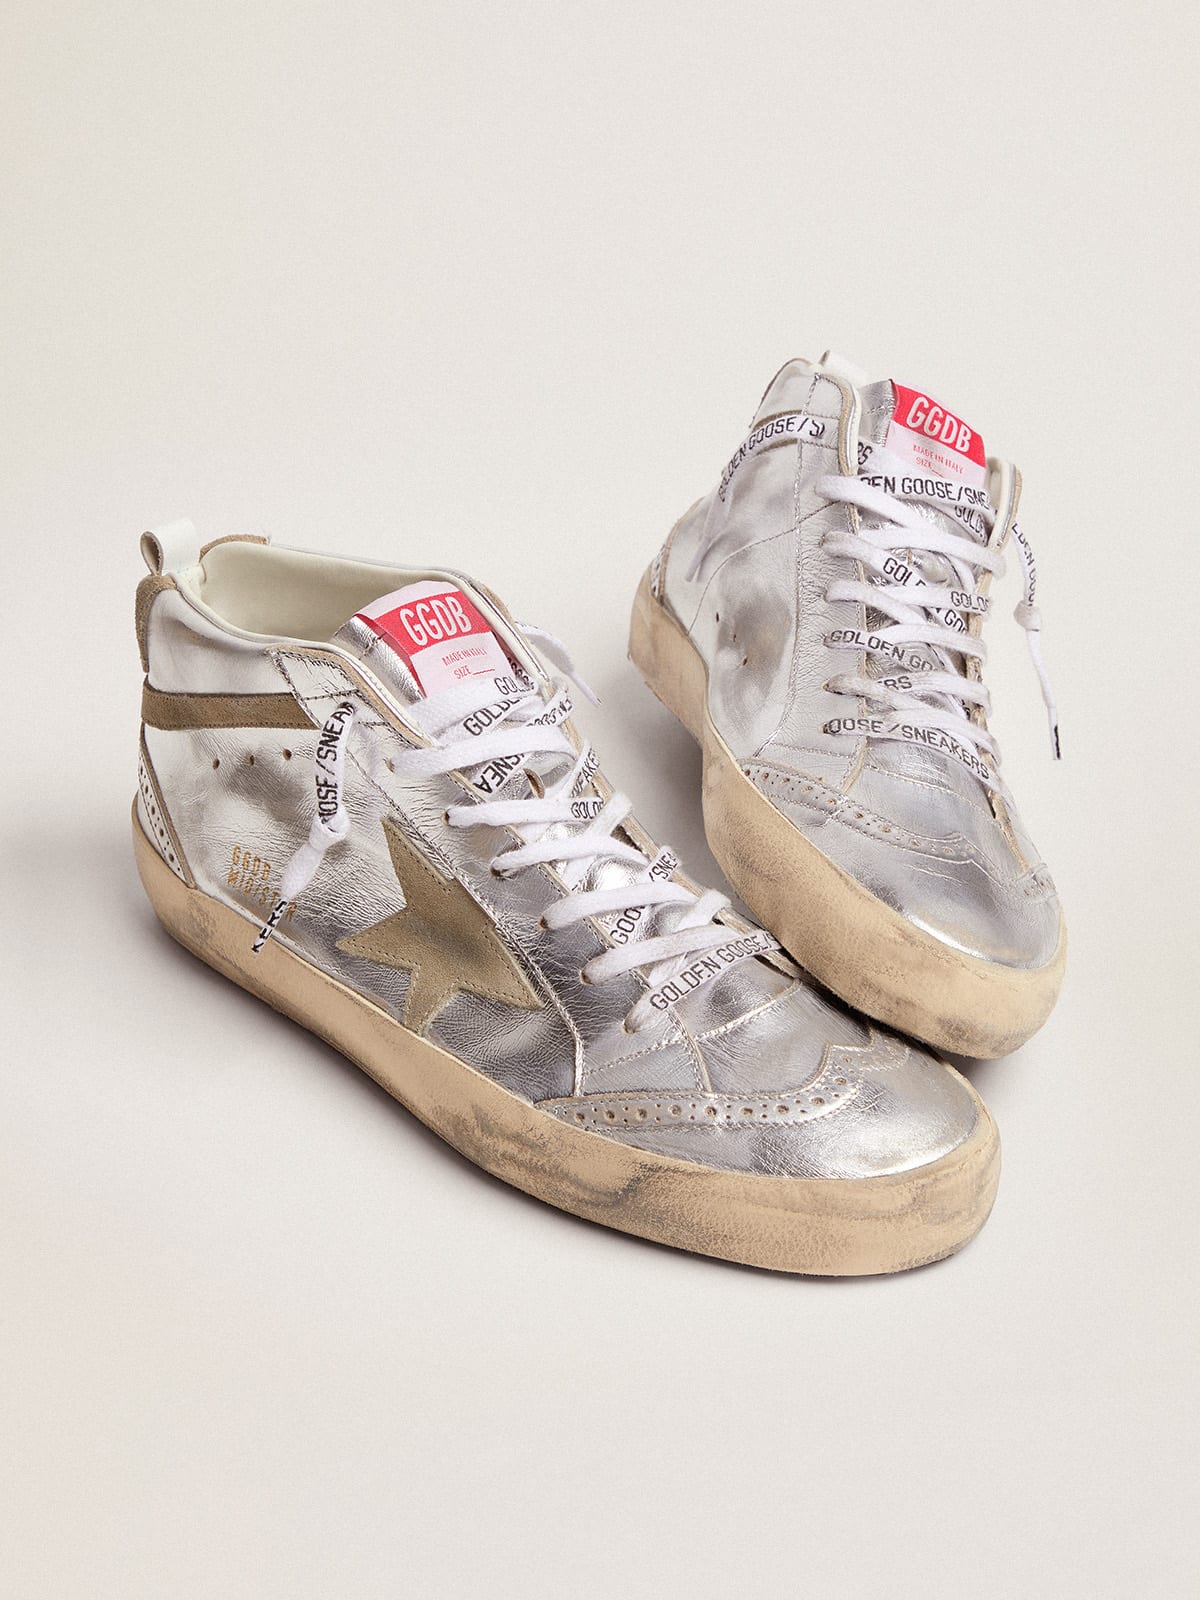 Golden Goose - Mid Star sneakers in silver metallic leather with star and flash in dove-gray suede in 